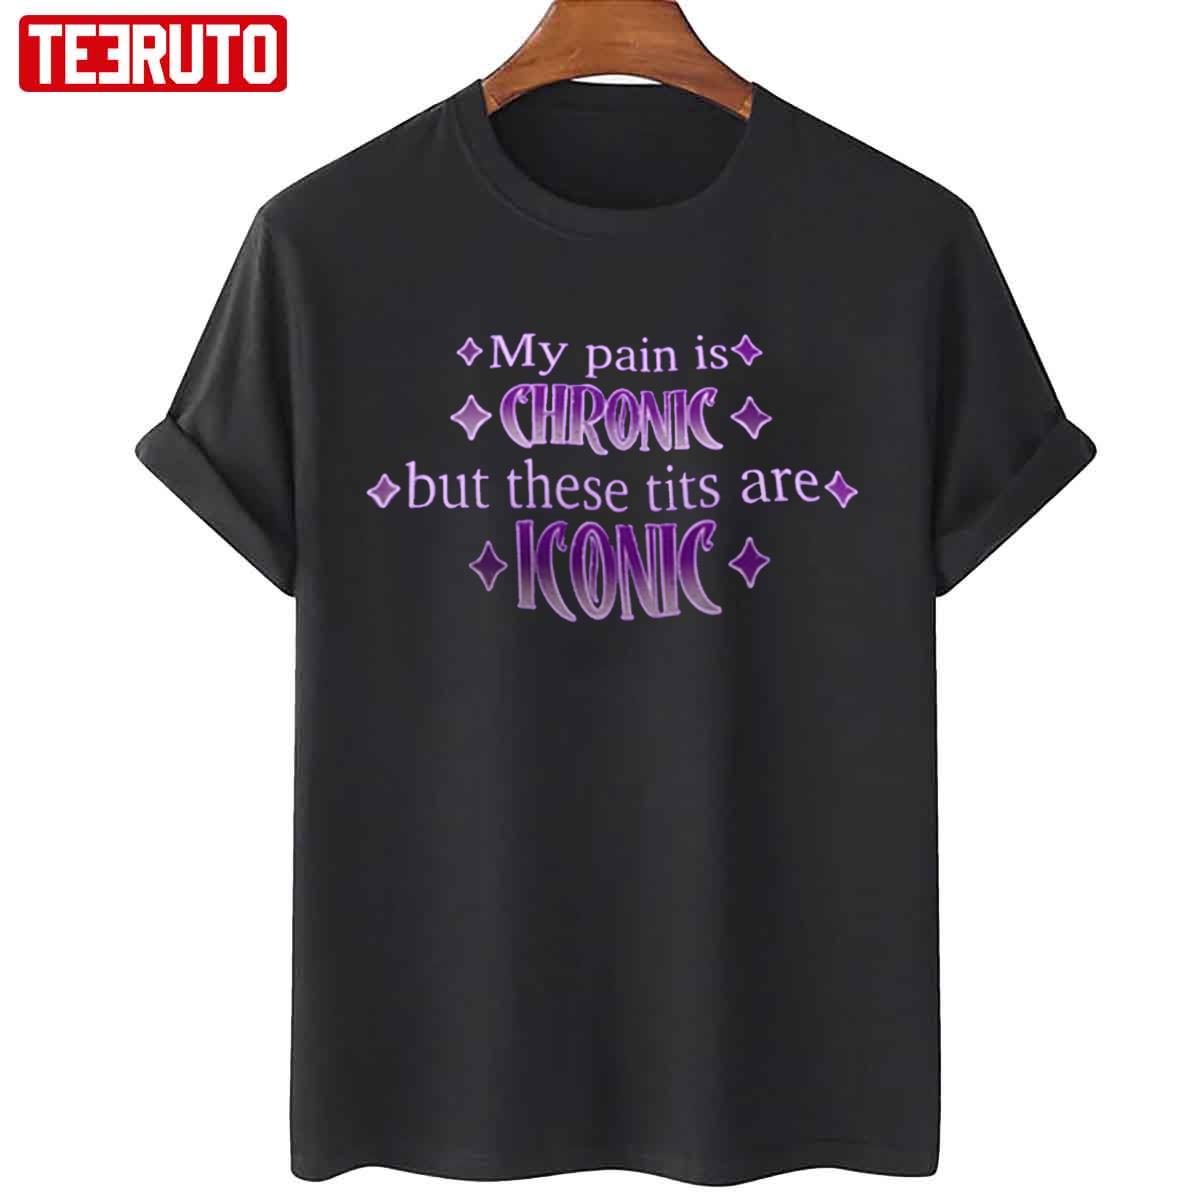 My Pain Is Chronic But These Tits Are Iconic Unisex T-Shirt